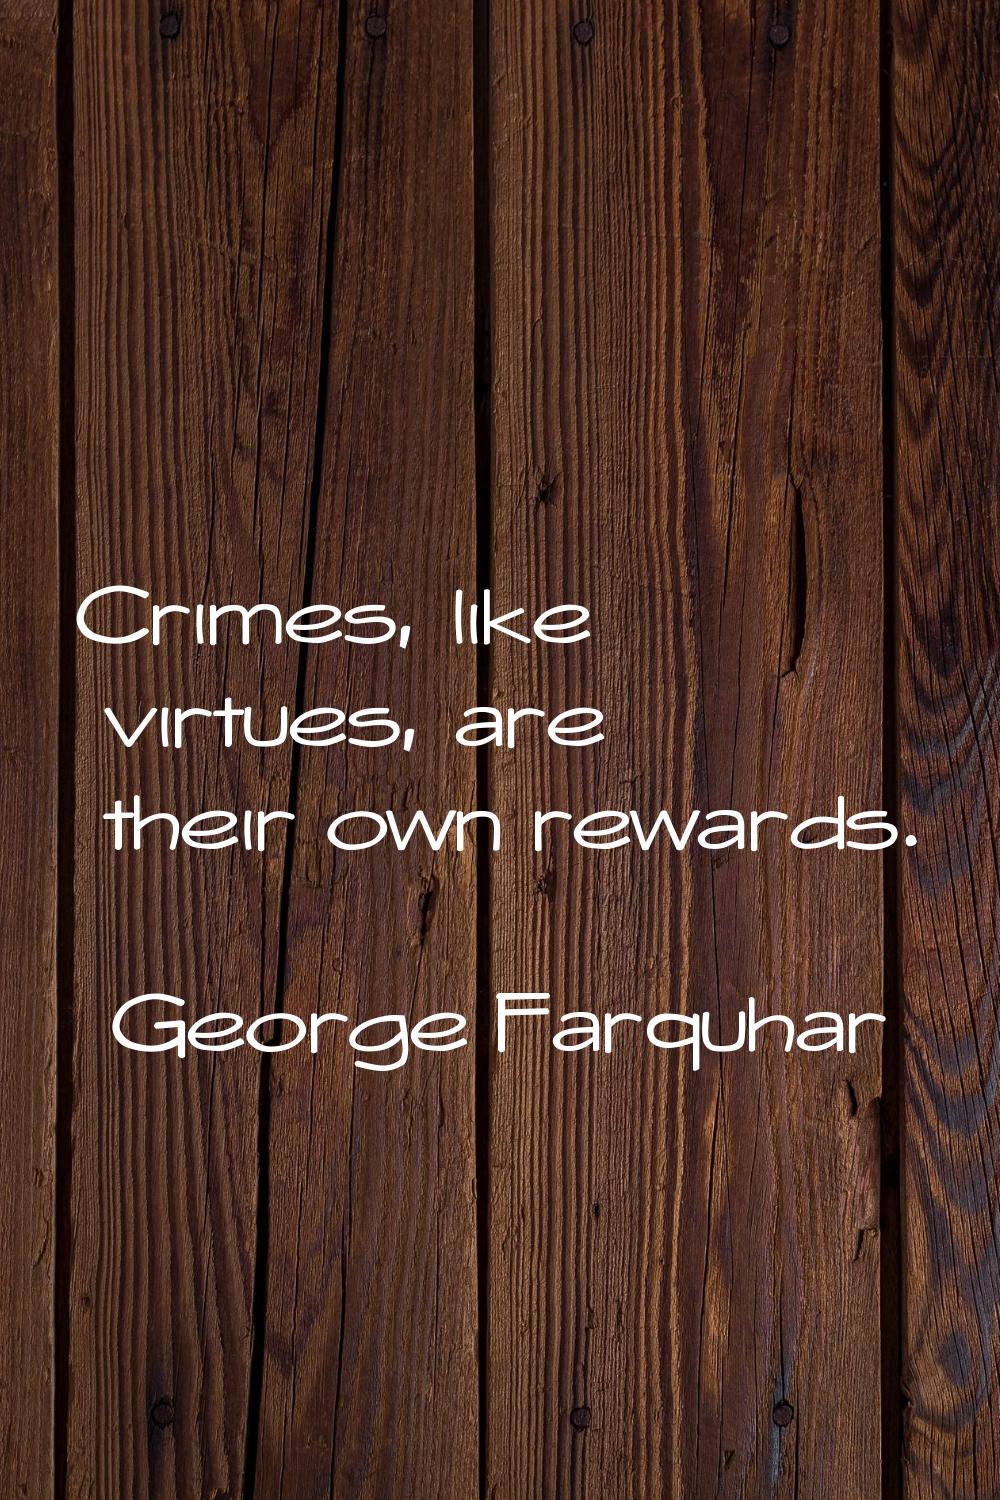 Crimes, like virtues, are their own rewards.